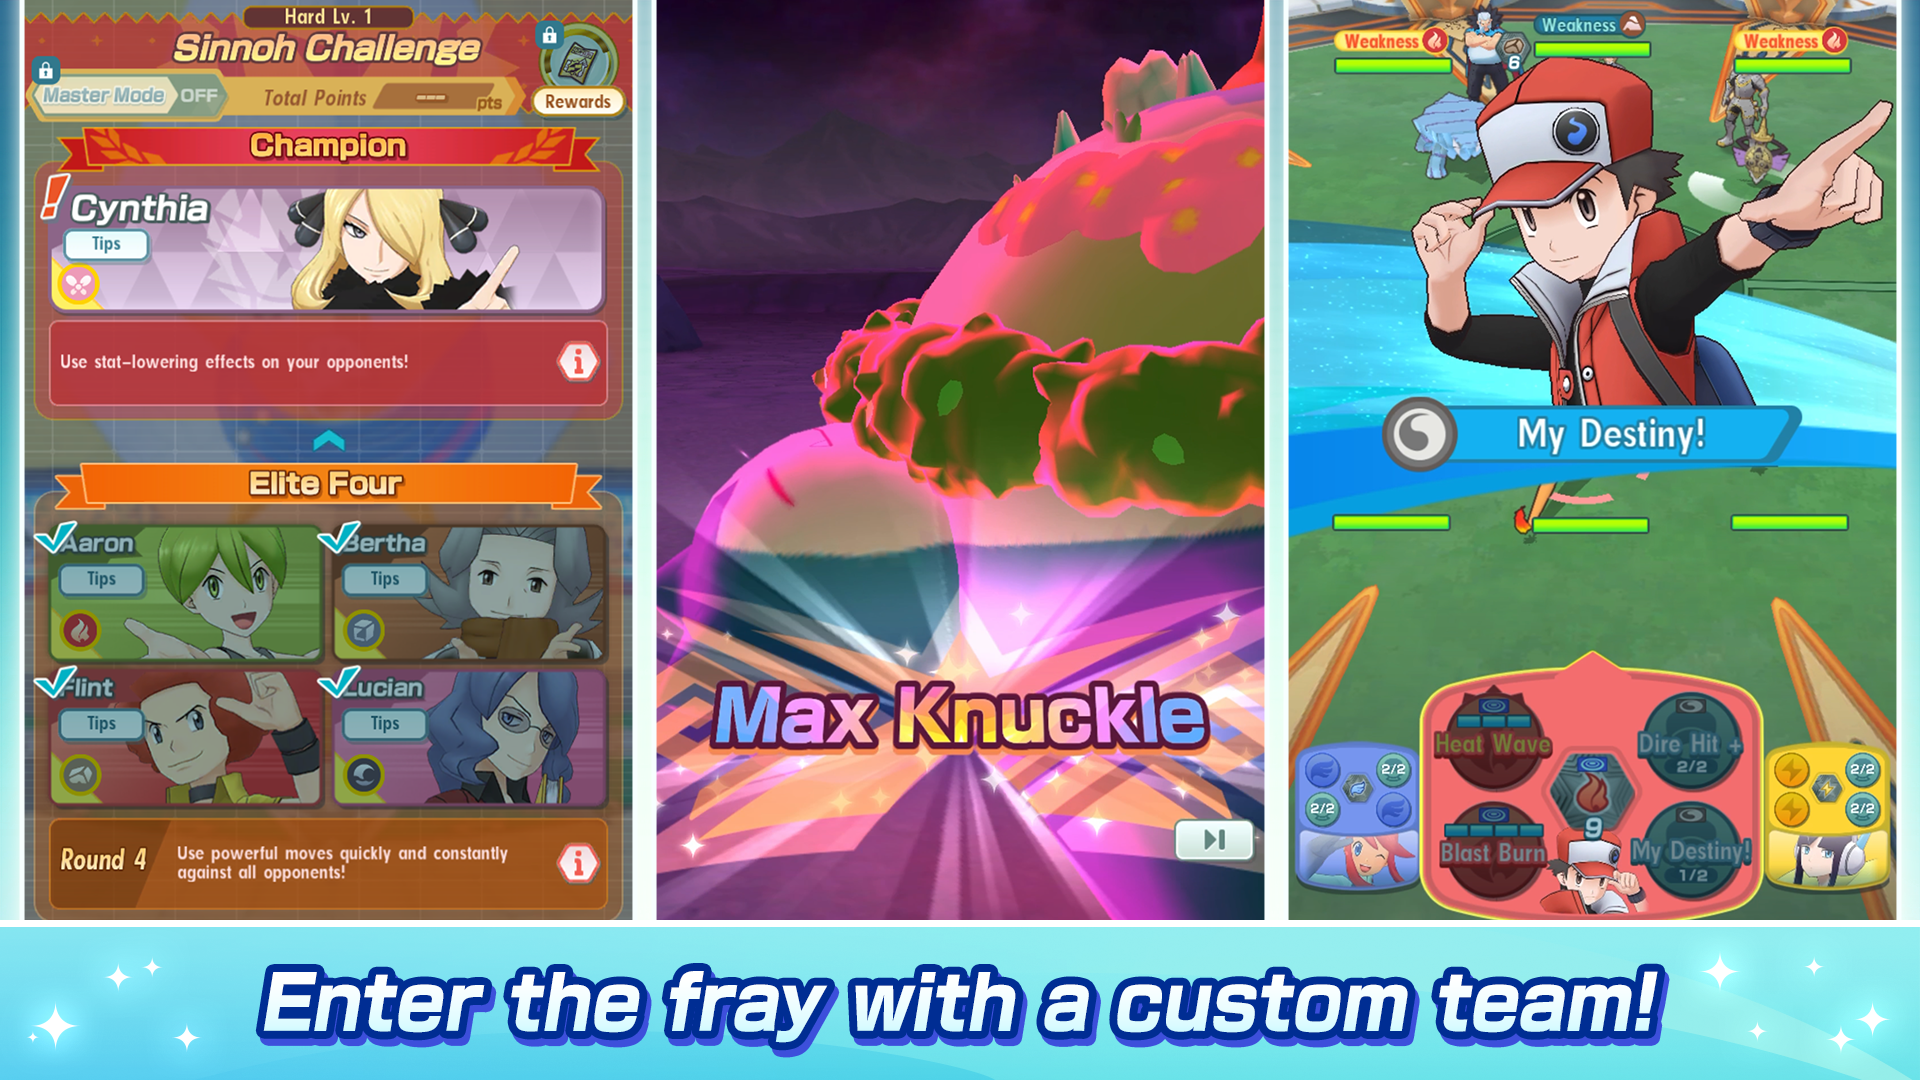 how to download pokemon sword and shield on android 100% (free) 